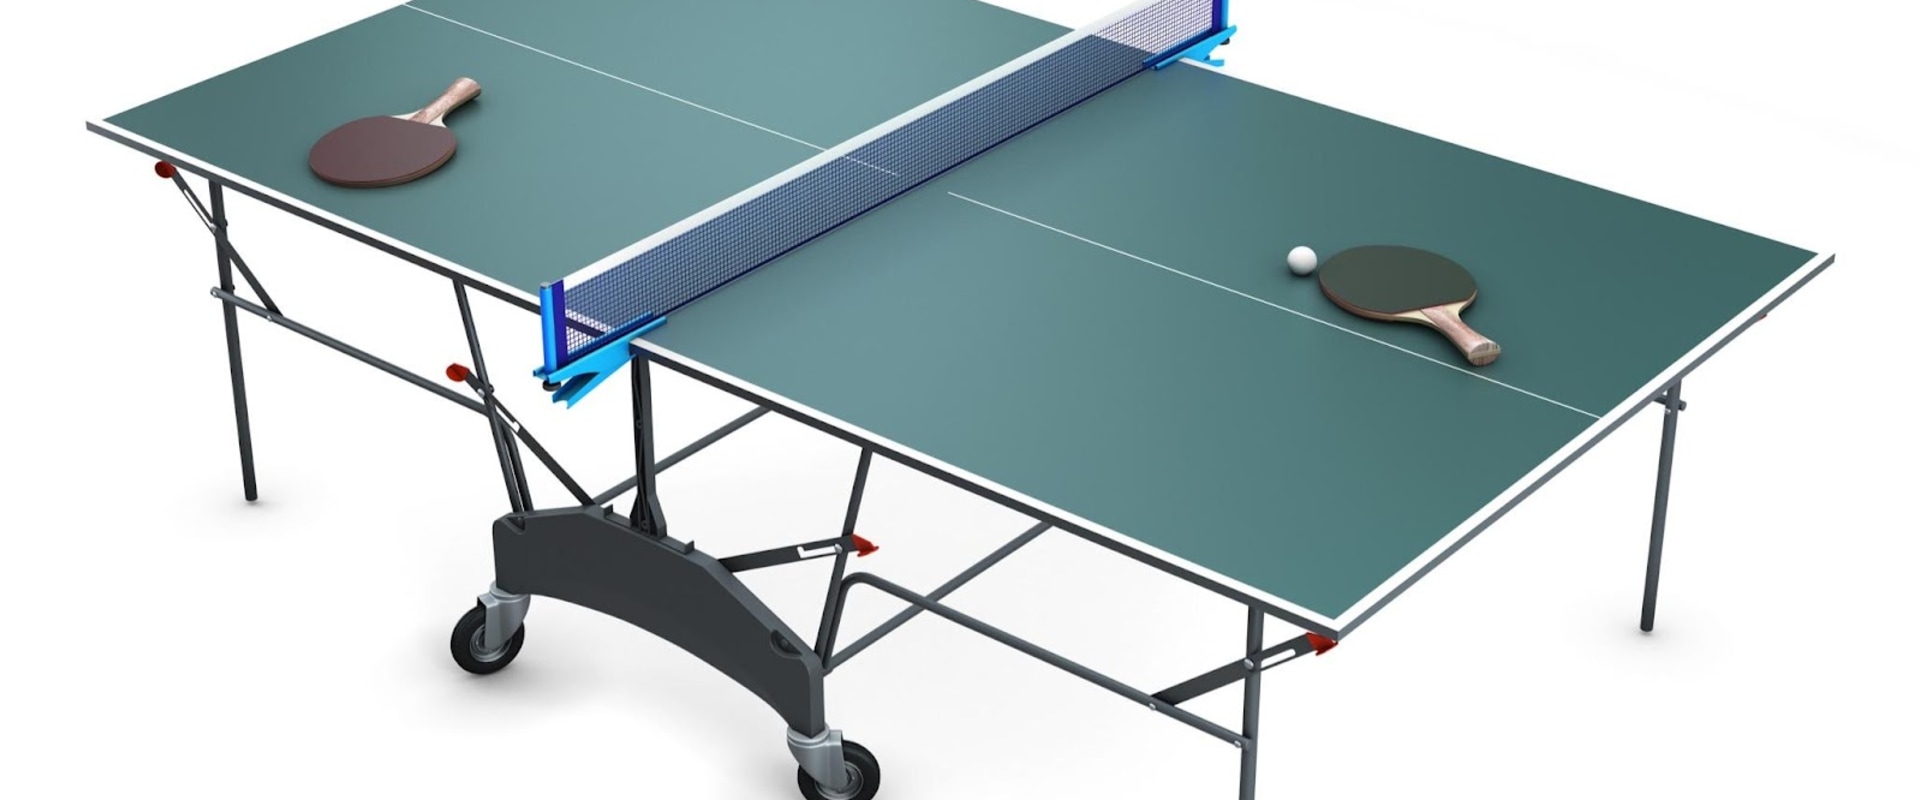 Table Tennis Equipment Rules: What You Need to Know